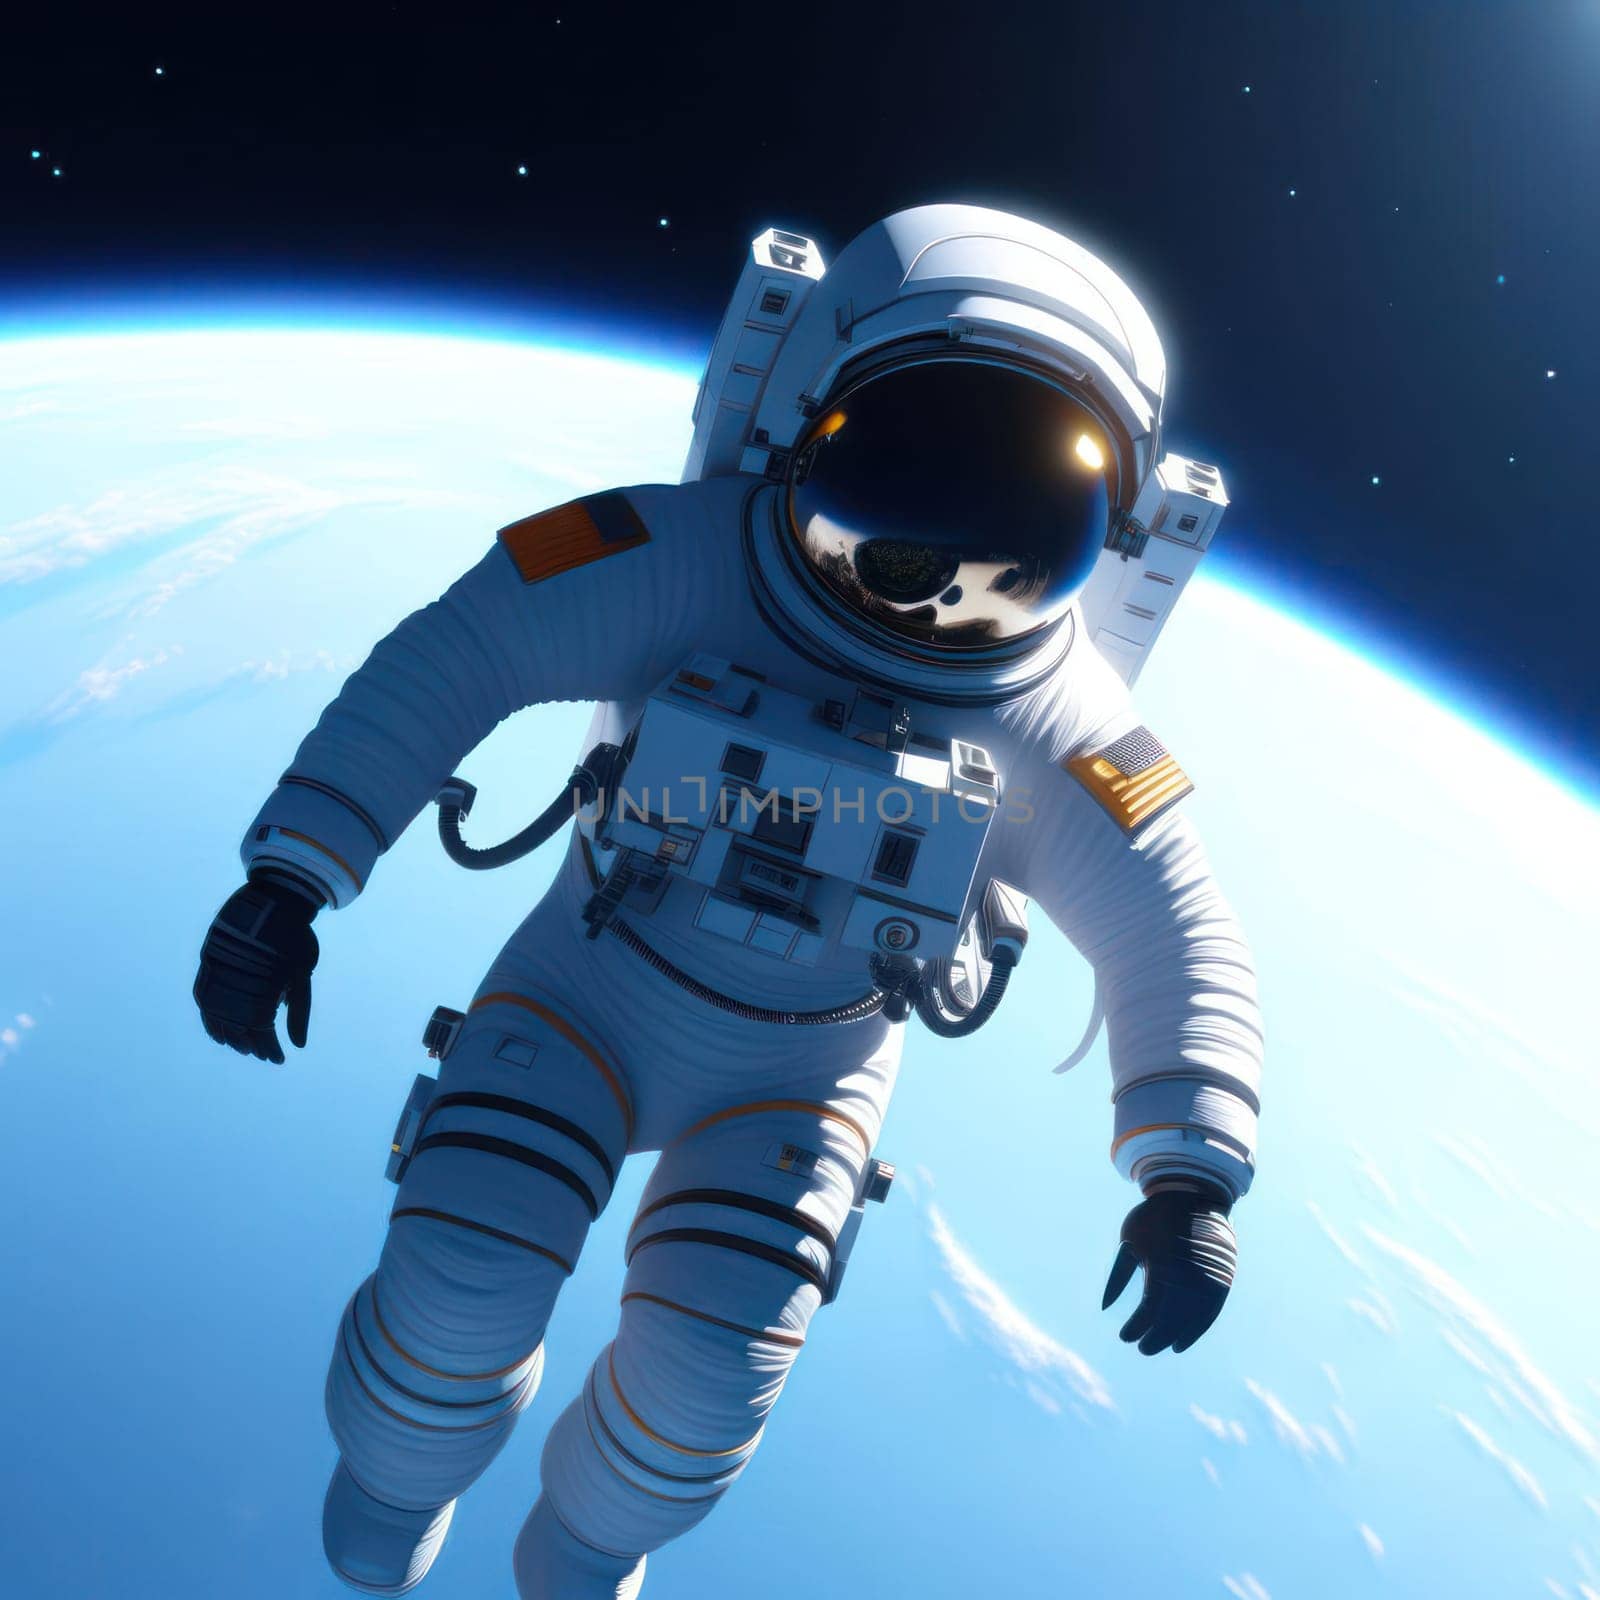 Astronaut in space. Image created by AI